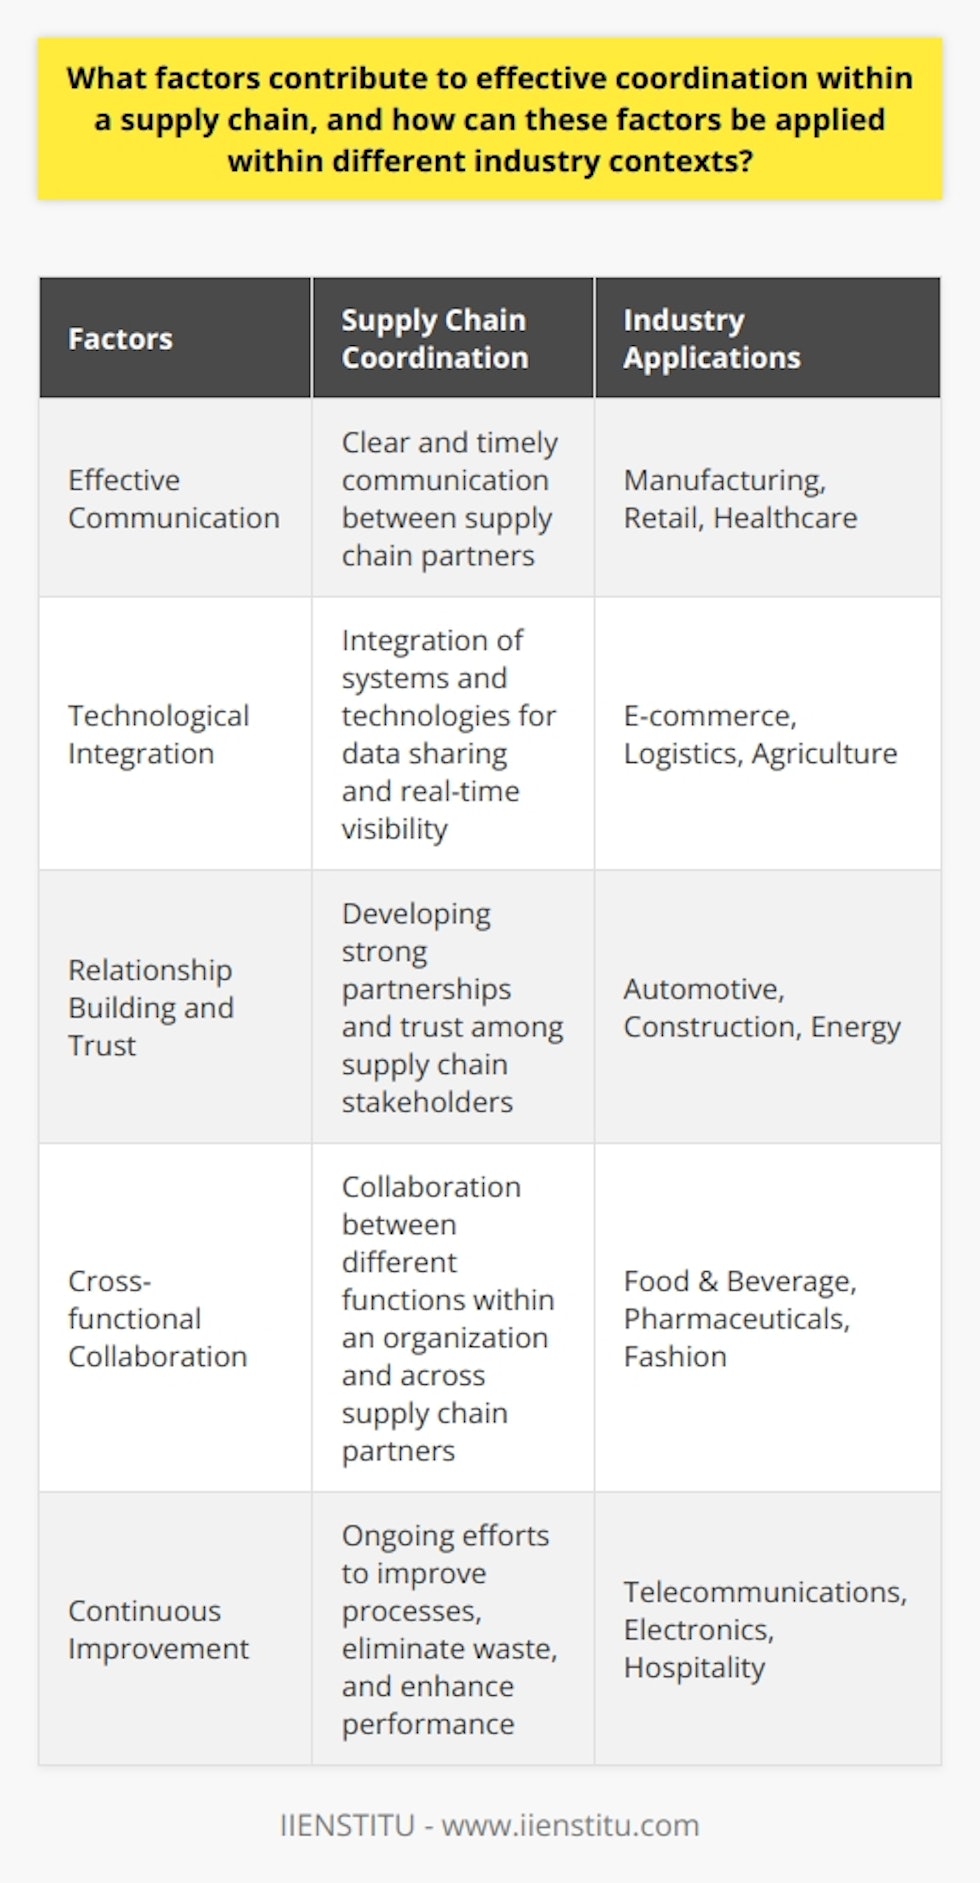 In conclusion, effective coordination within a supply chain relies on several factors that can be applied across different industry contexts. These factors include effective communication, technological integration, relationship building and trust, cross-functional collaboration, and continuous improvement. By prioritizing these factors and implementing them in their supply chain operations, organizations can achieve better efficiency, responsiveness, and overall performance in delivering goods and services.